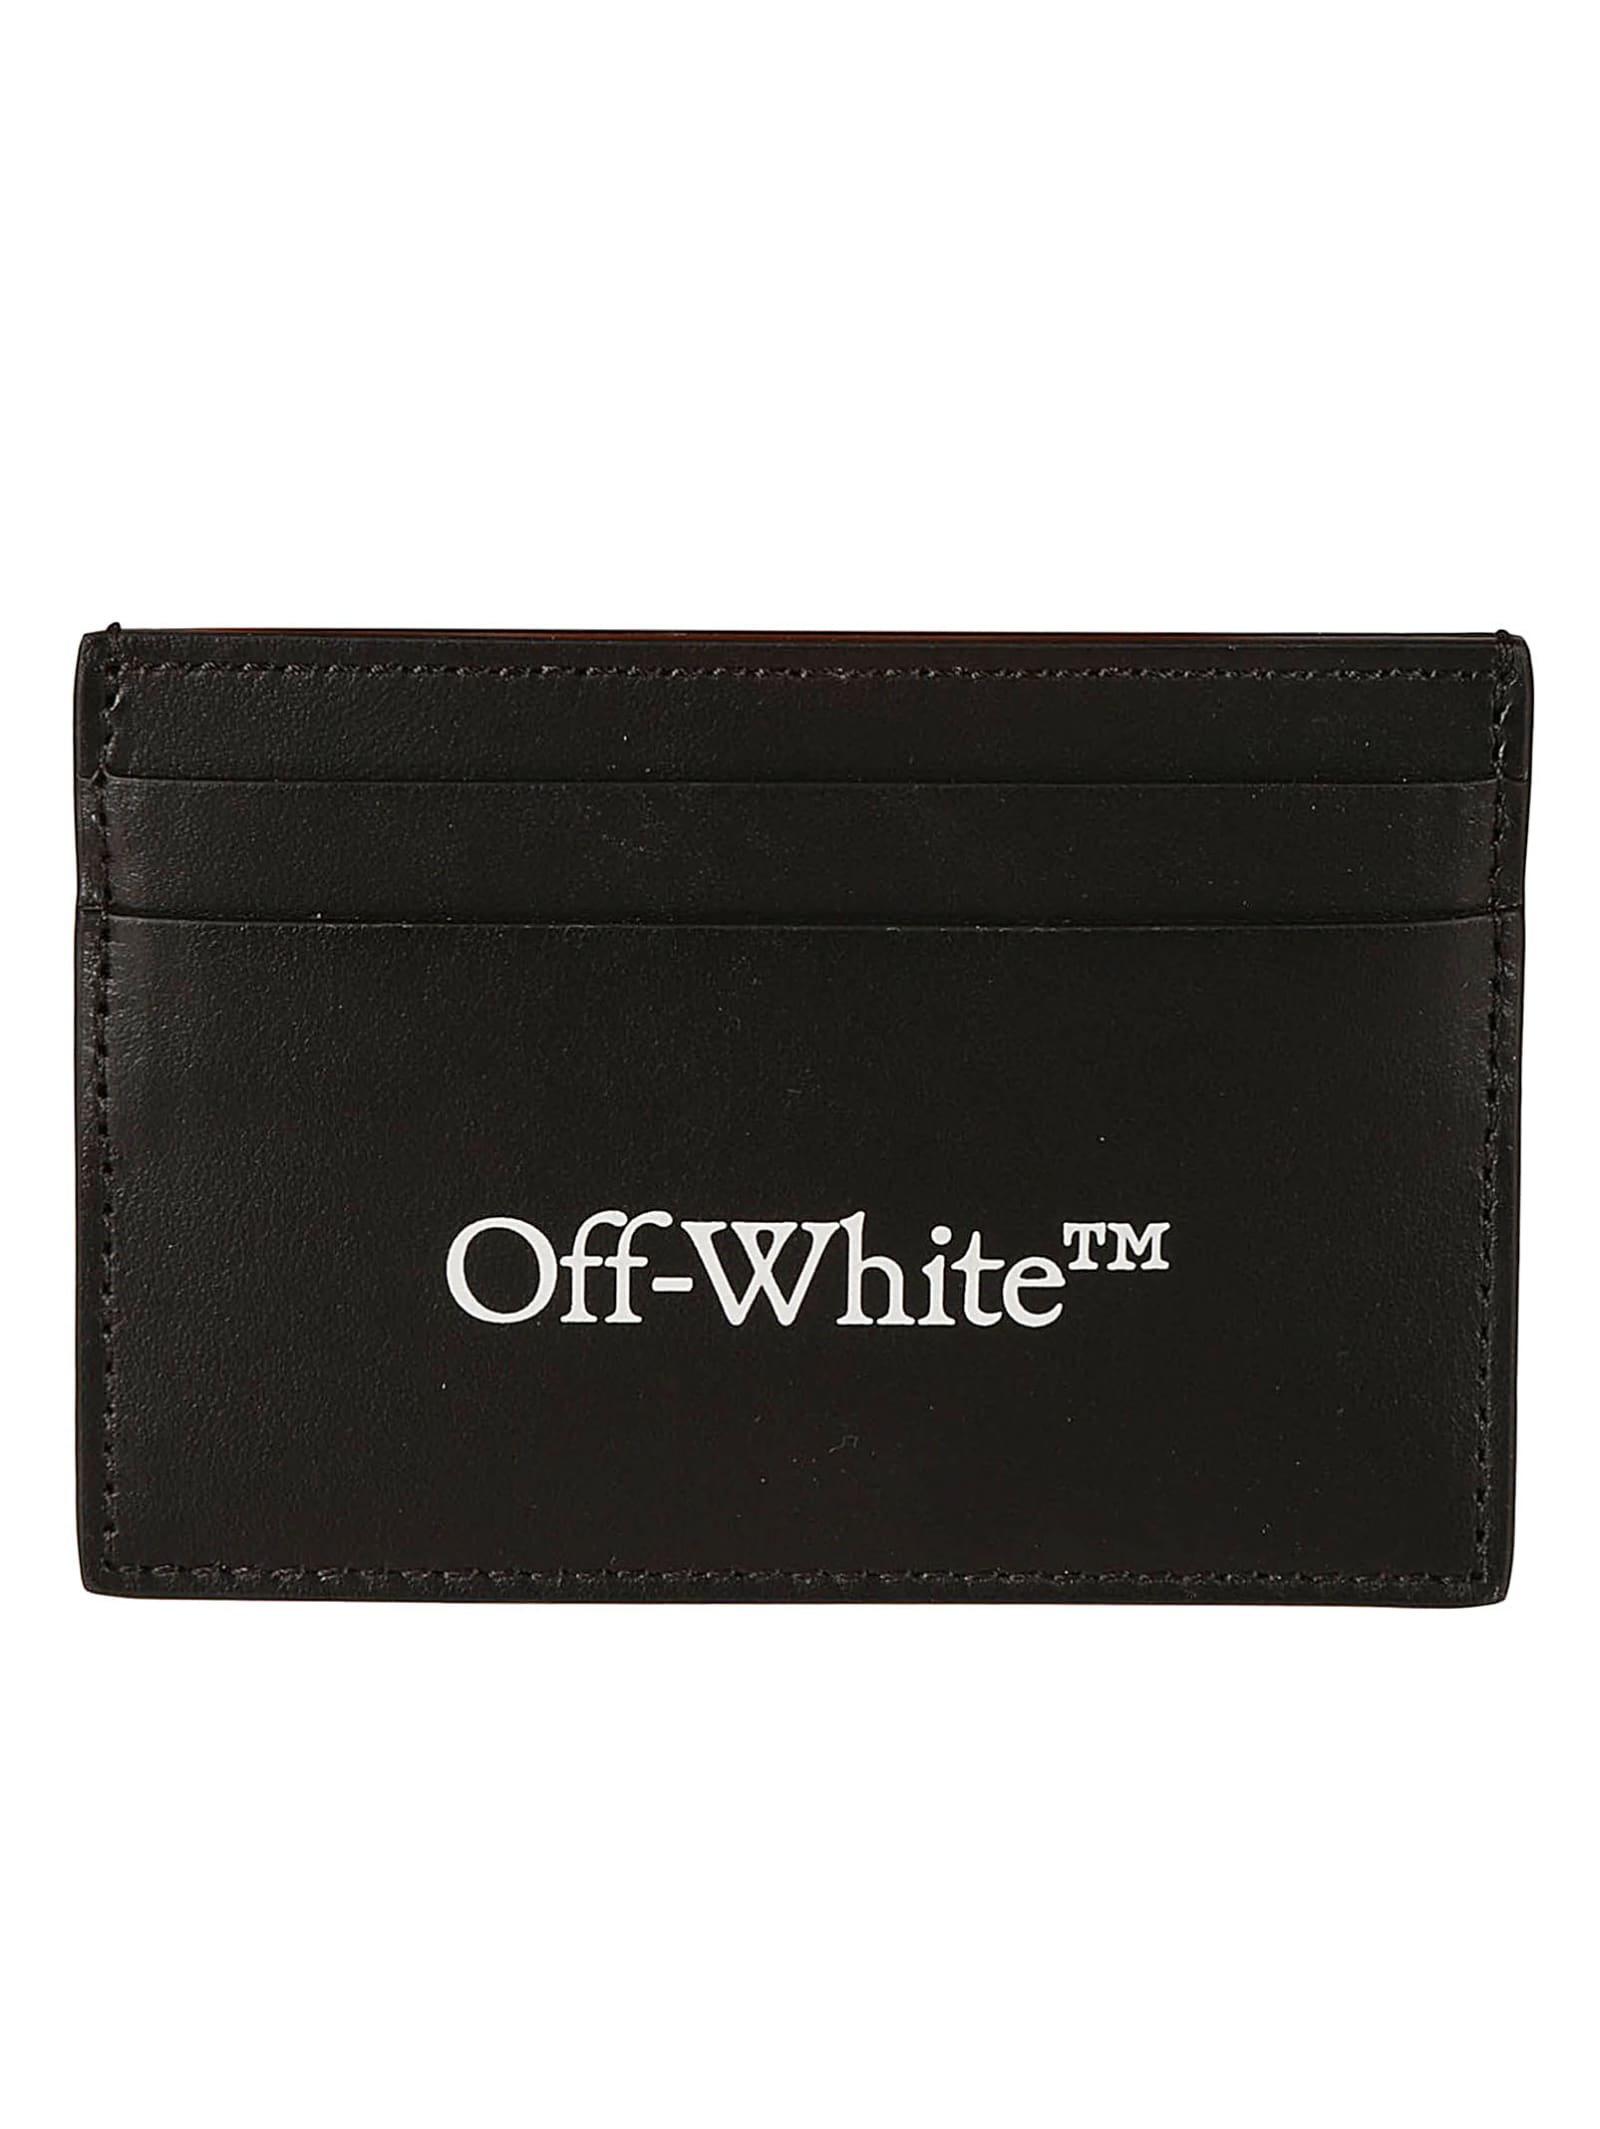 Off-white Bookish Card Holder In Black/white